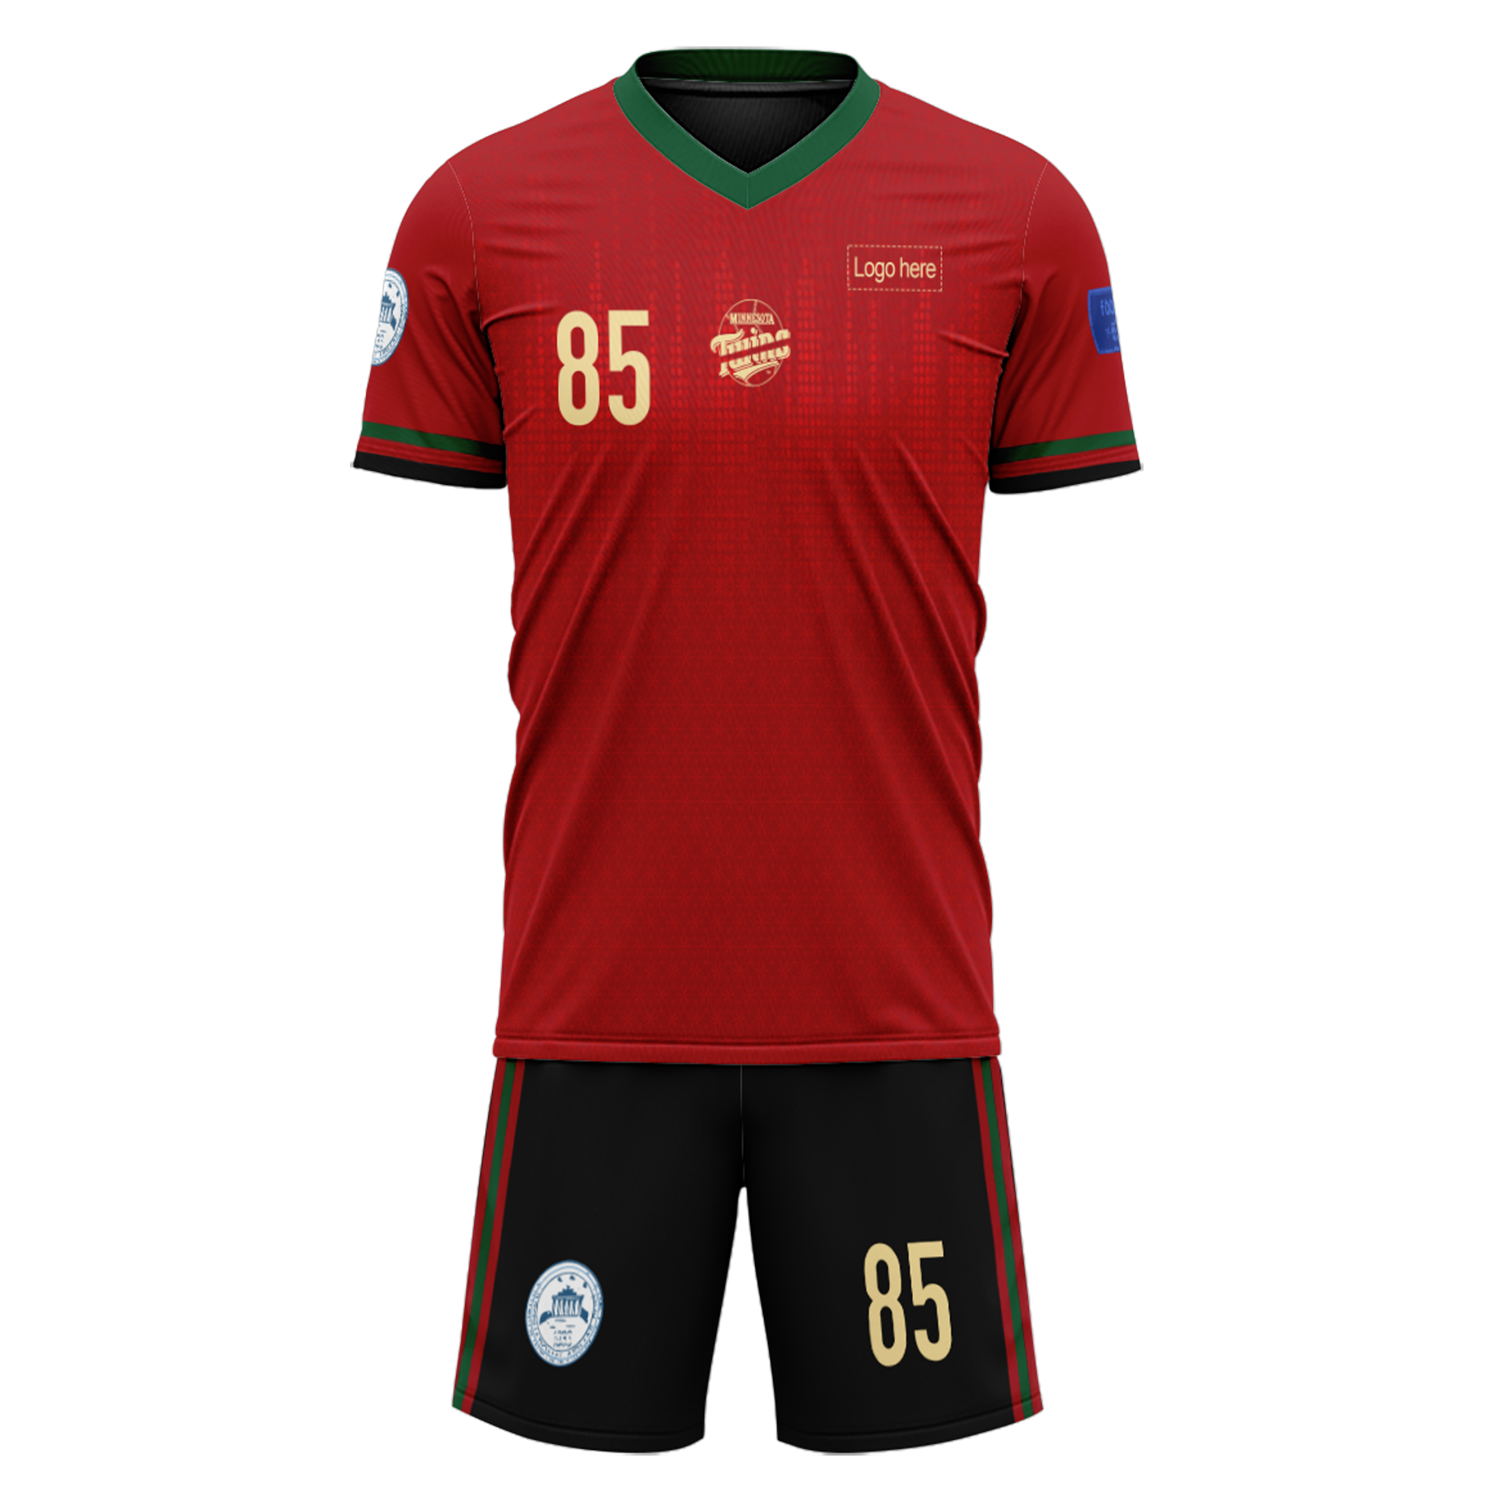 Custom Portugal Team Football Suits Personalized Design Print on Demand Soccer Jerseys